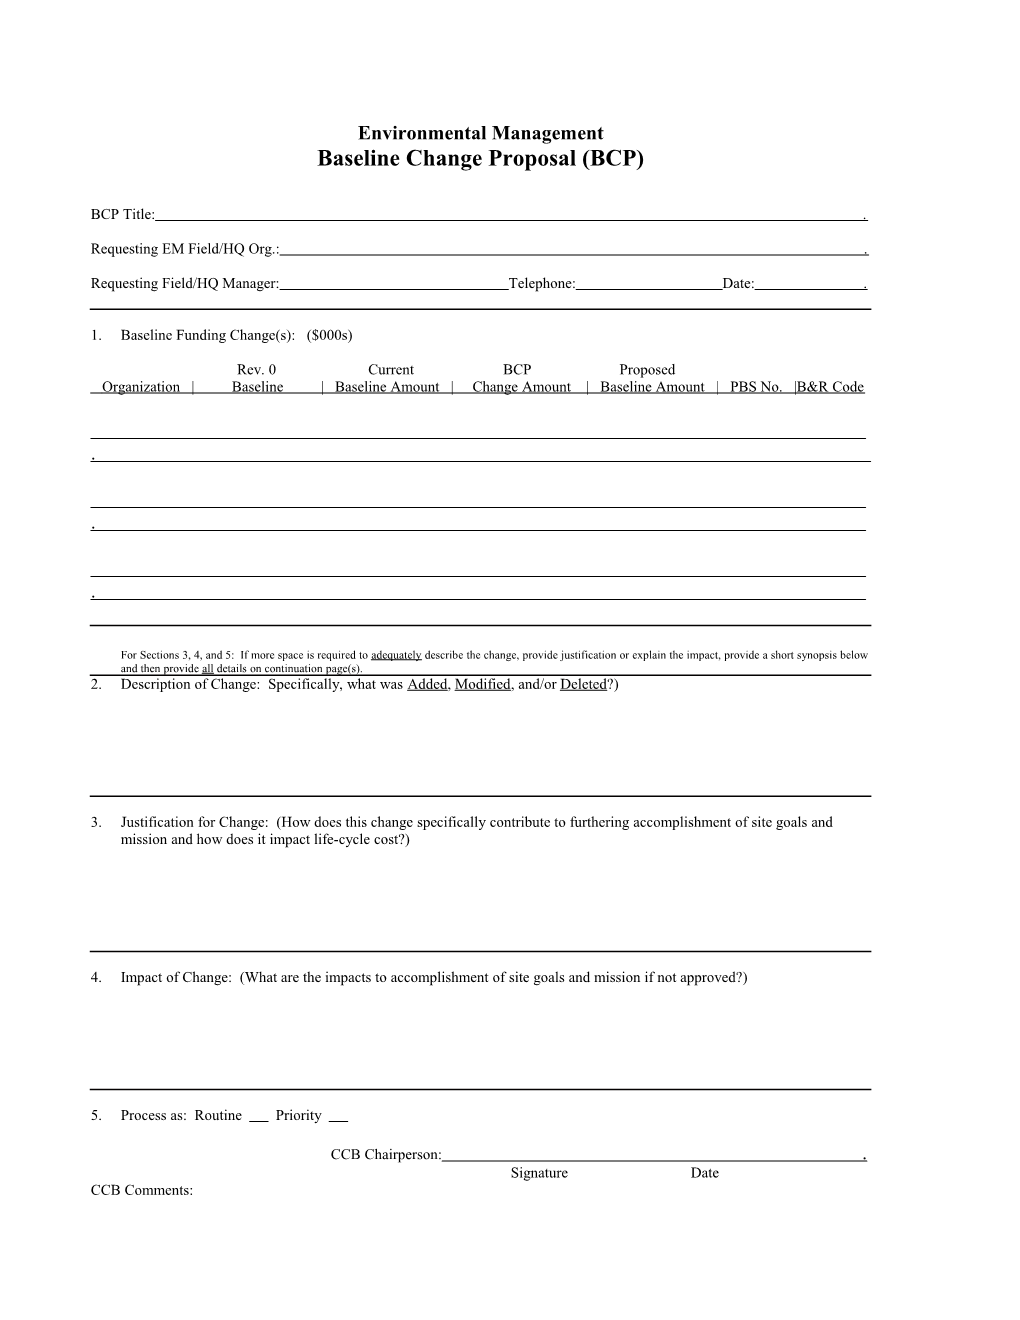 EM-1 Approved WIPP Baseline Shipping Schedule Change Proposal Instructions